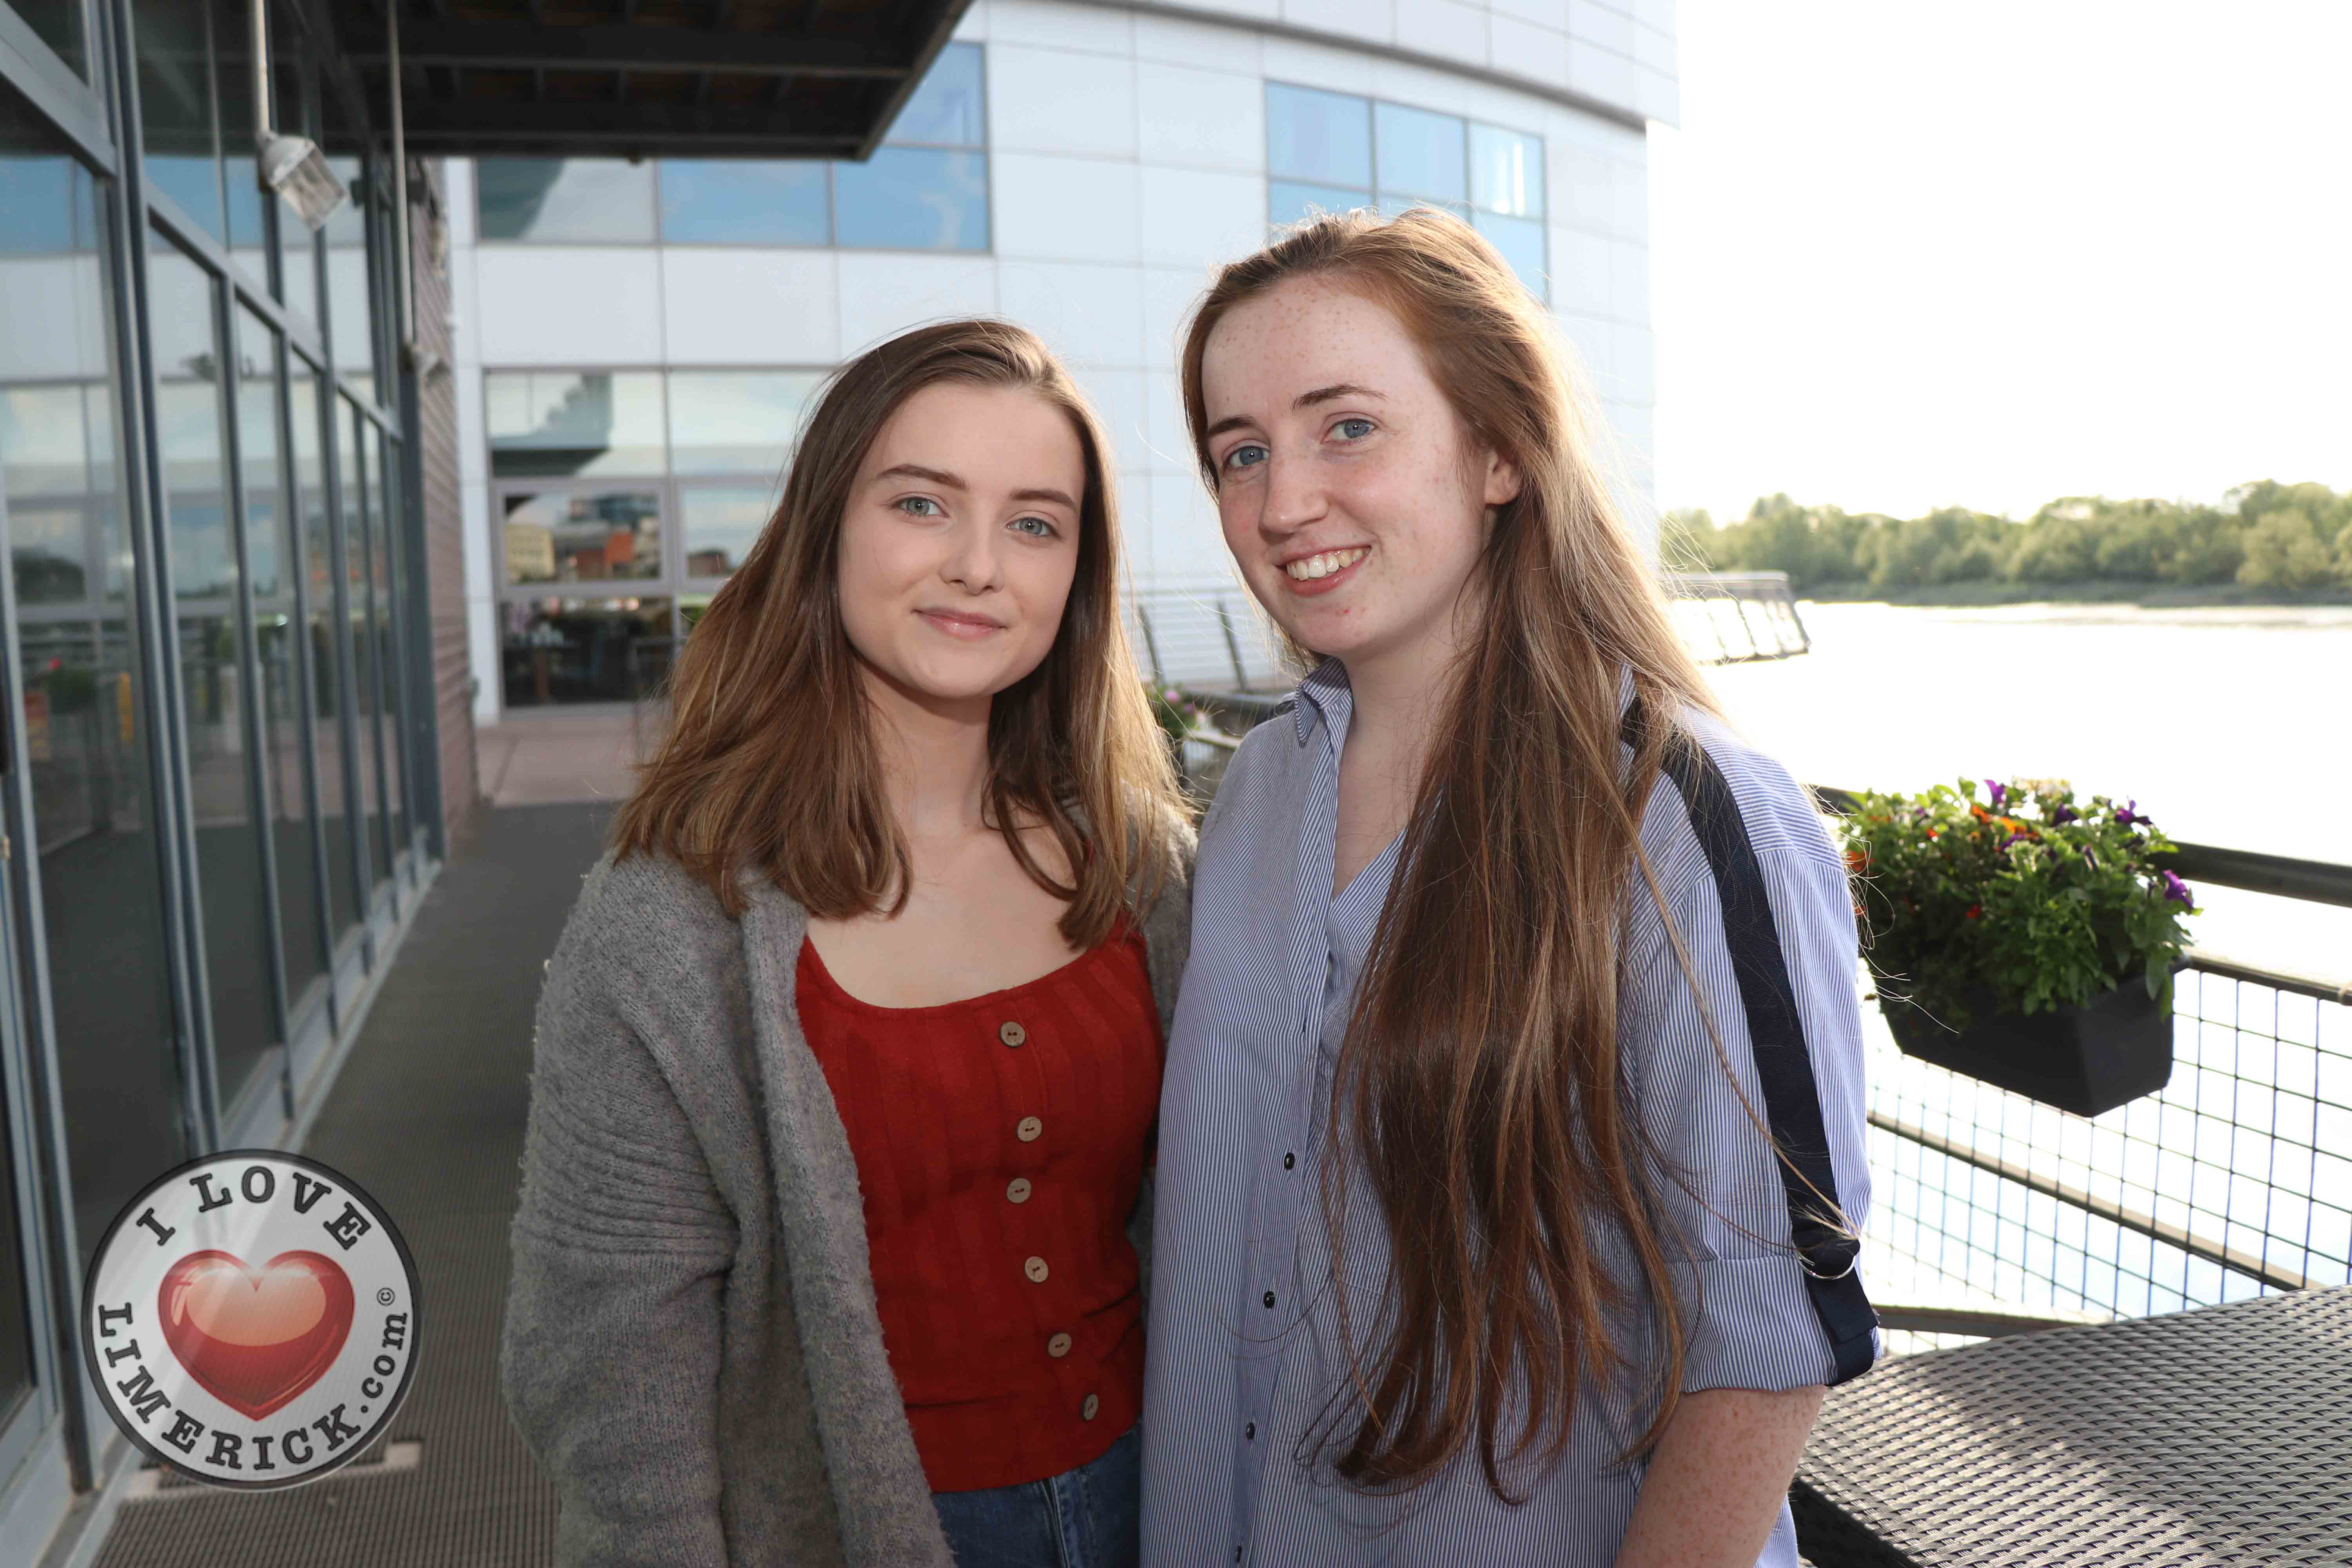 Pictured at the Limerick Pride 2019 Press Launch at the Clayton Hotel are Sinead Fitzgibbon, Rathkeale, and Chloe Reidy, Castletroy. Picture: Orla McLaughlin/ilovelimerick.